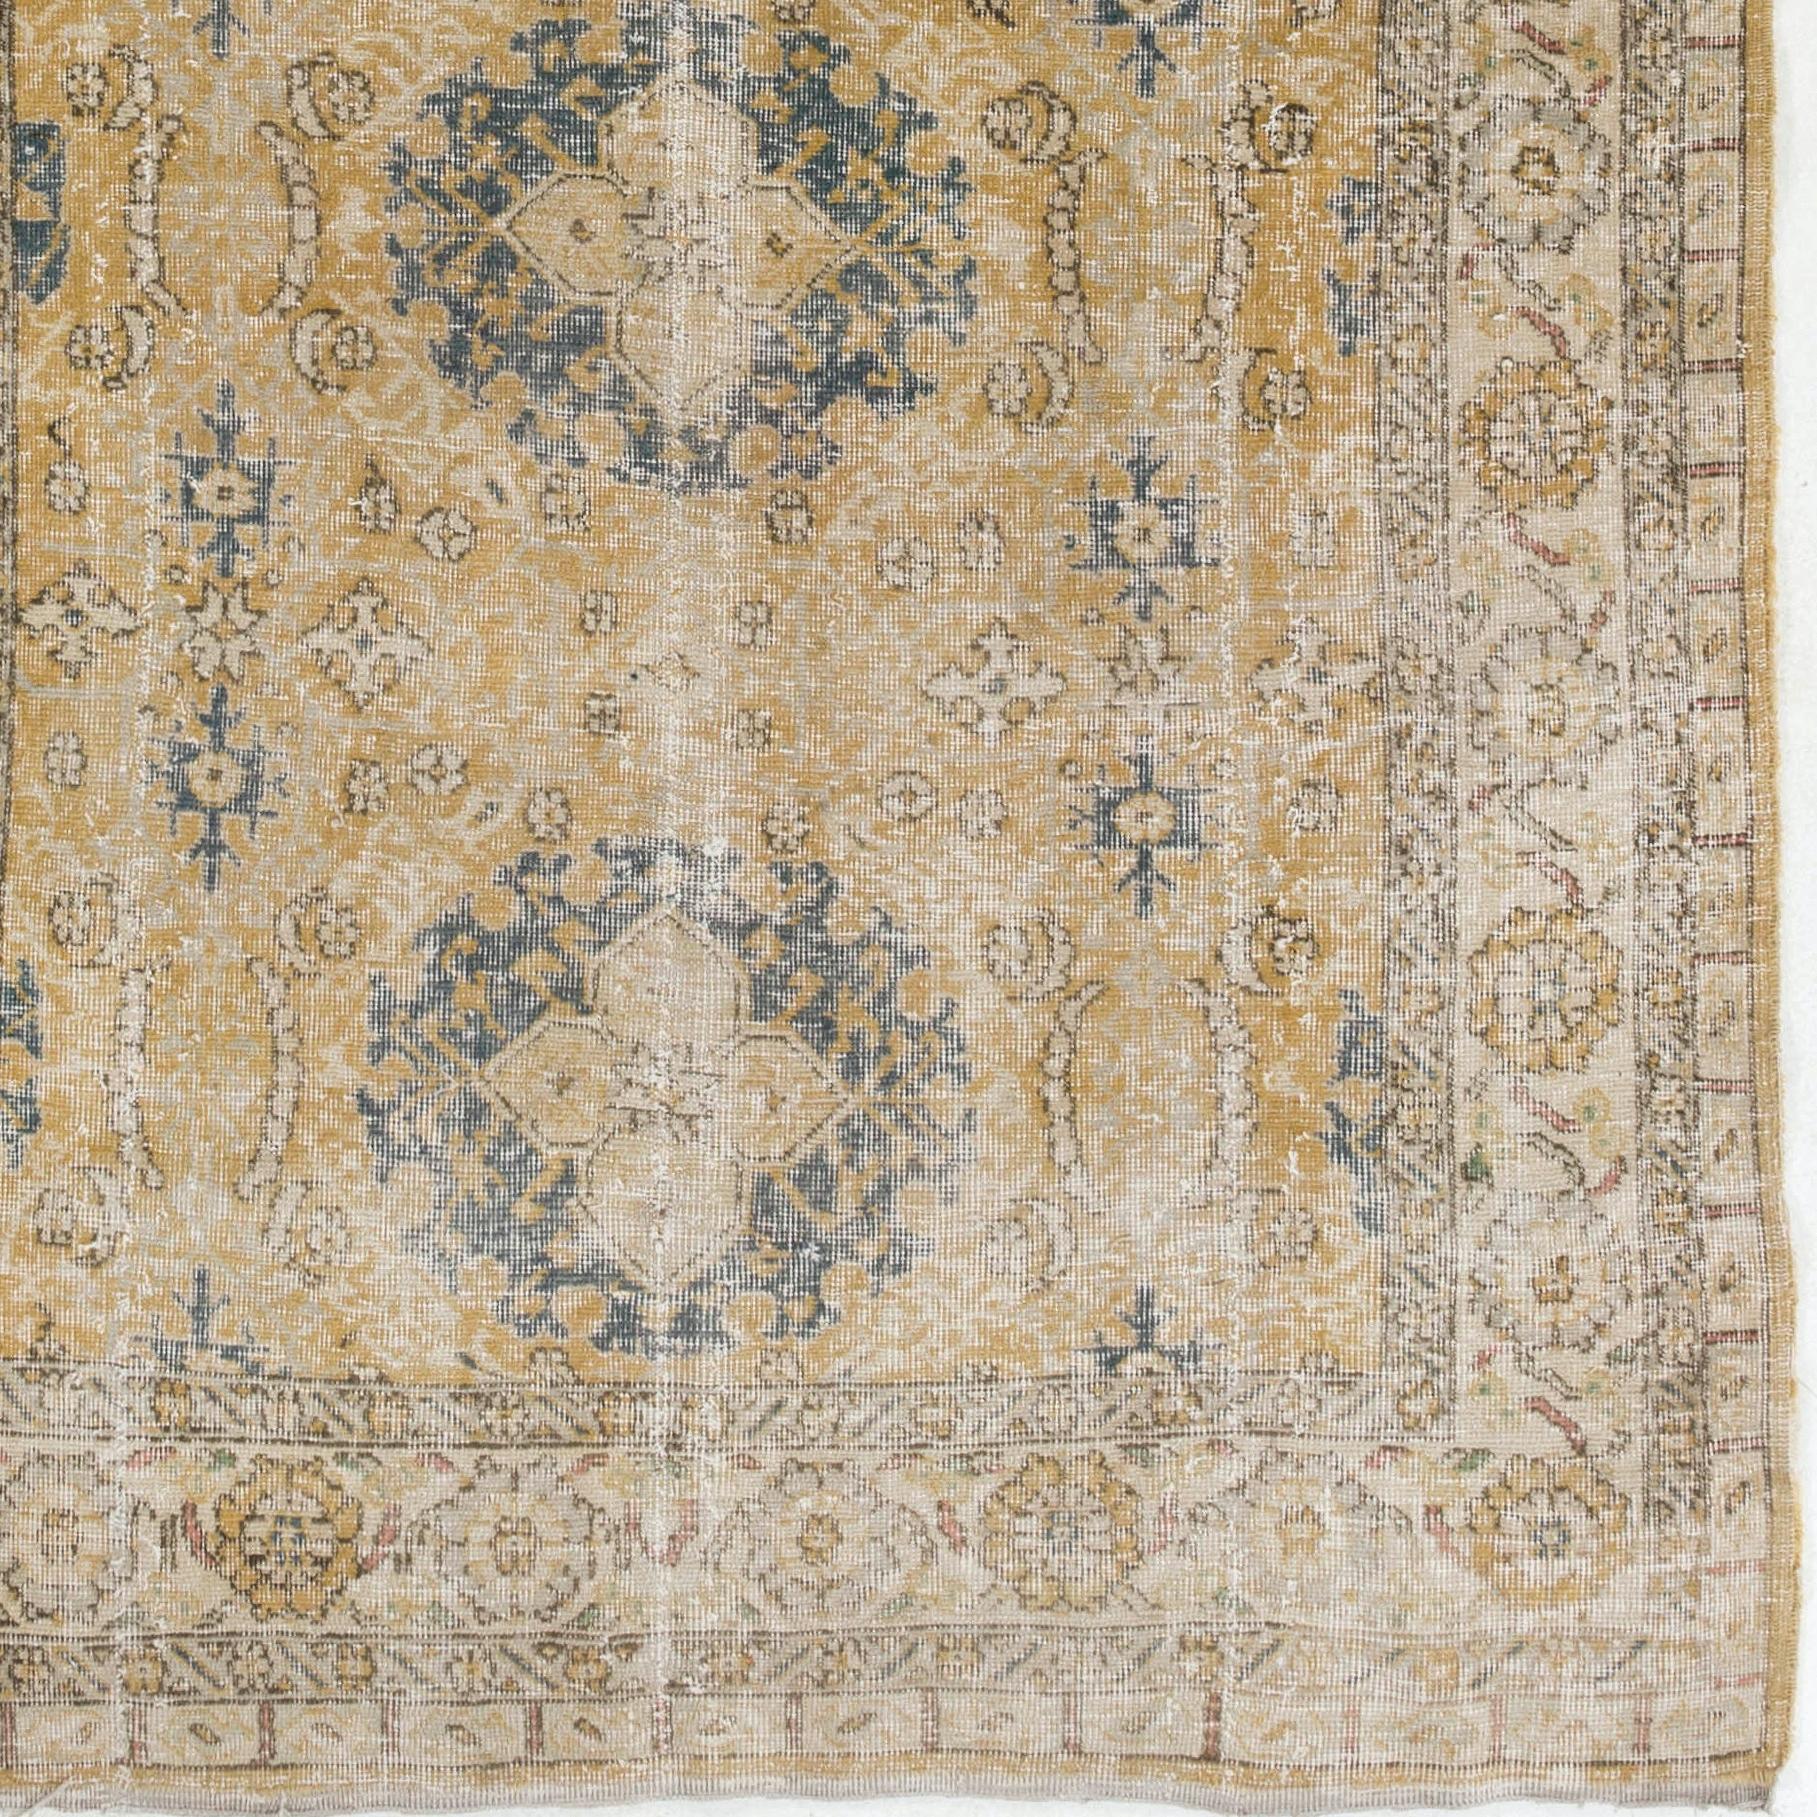 Turkish 5x8 Ft Vintage Central Anatolian Area Rug, Shabby Chic Handmade Wool Carpet For Sale